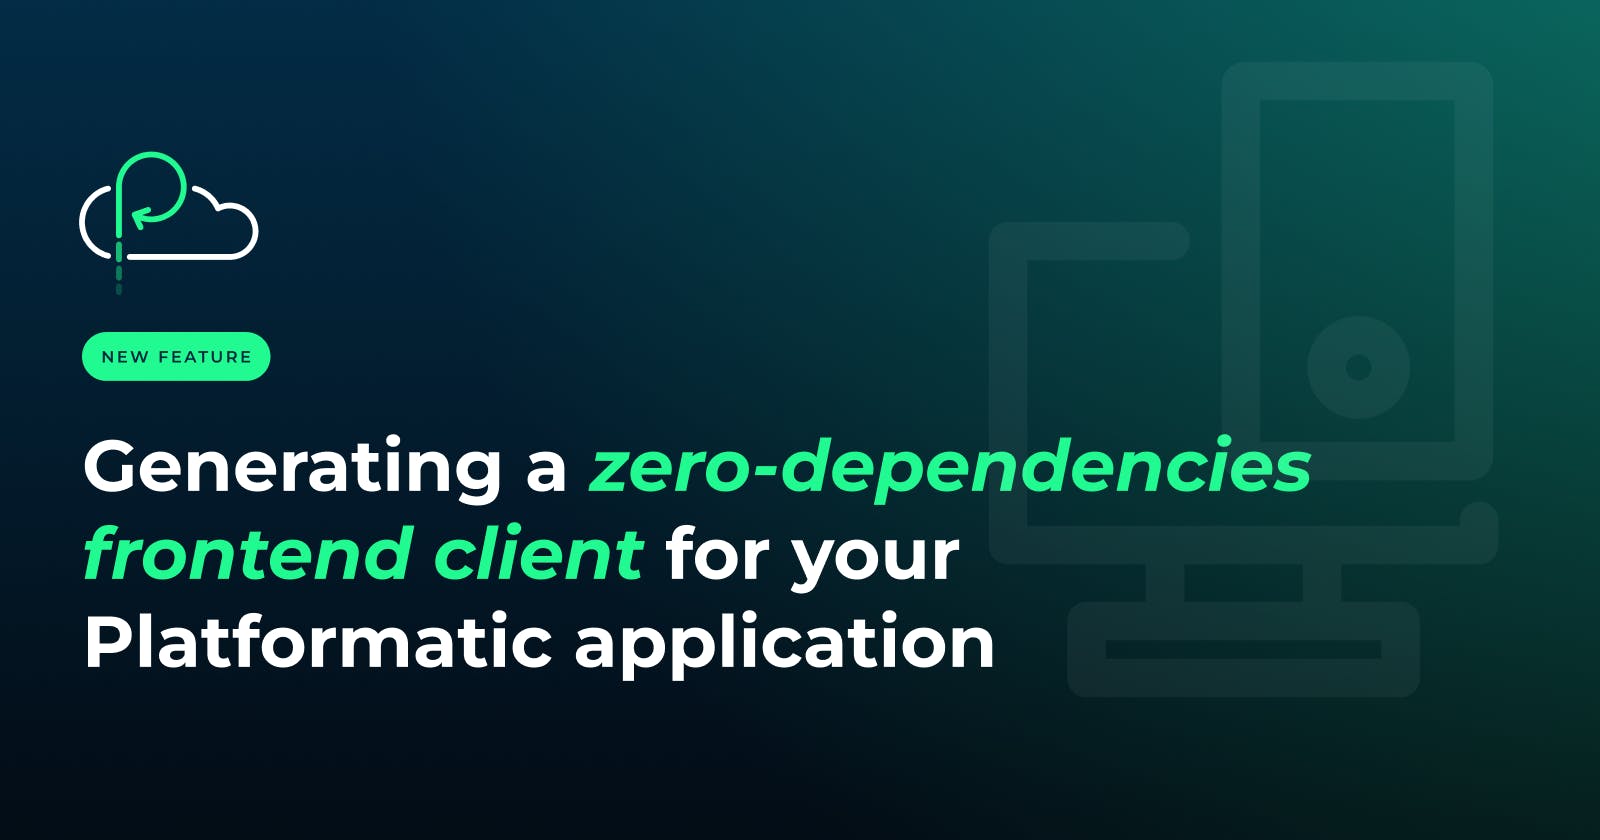 Generating a zero-dependencies frontend client for your Platformatic application